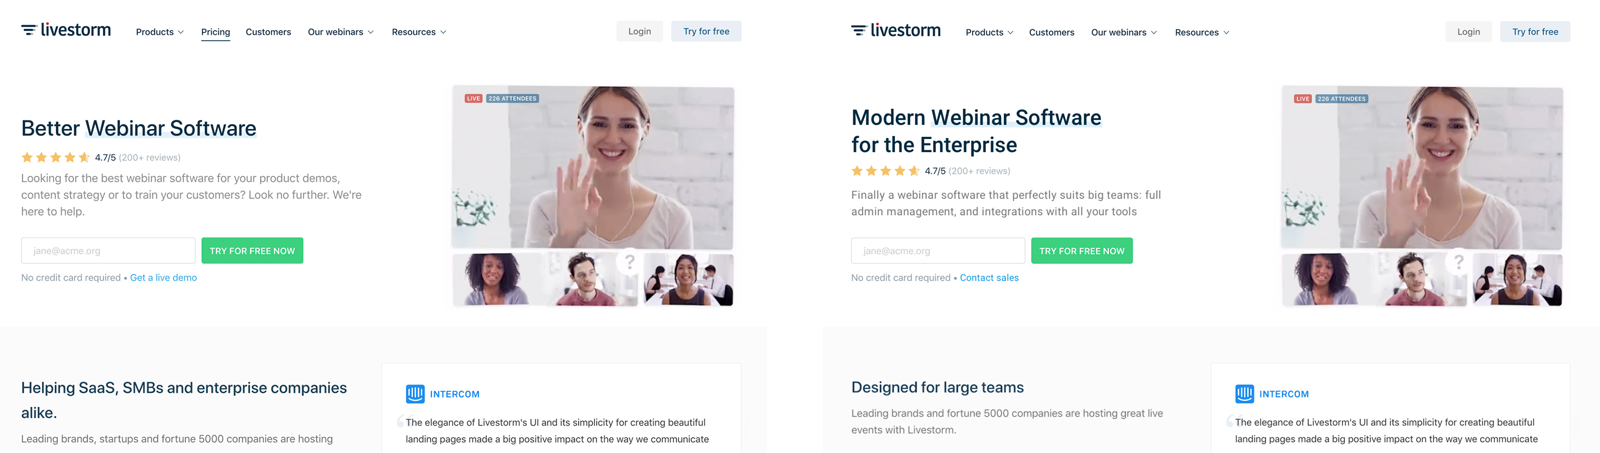 comparison of Livestorm homepage experience between general and enterprise messaging